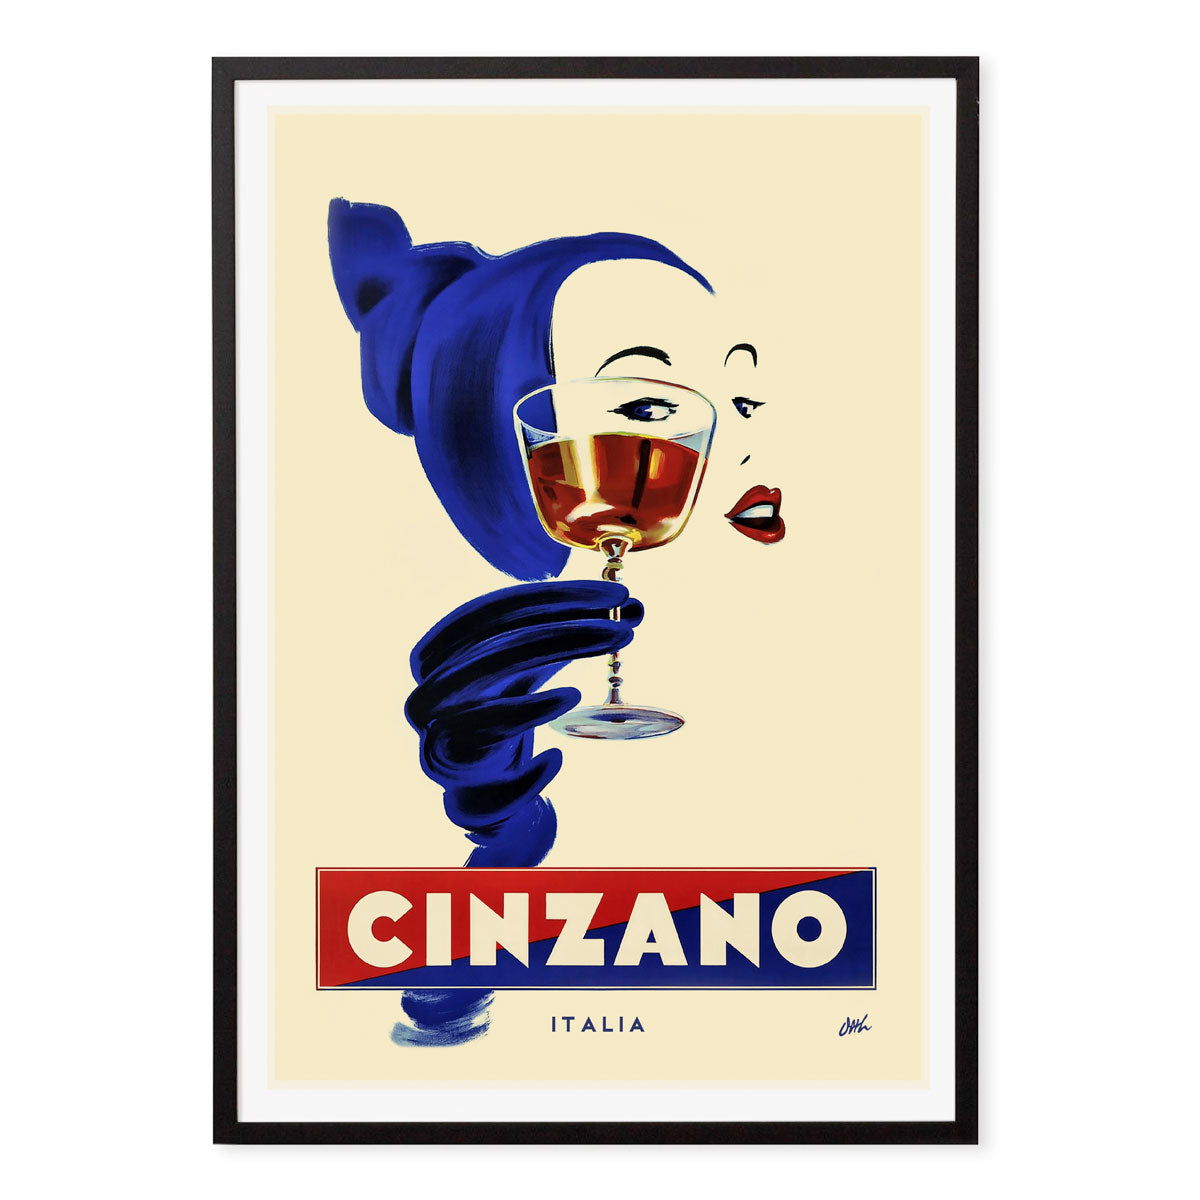 Cinzano retro vintage advertising poster or black framed print from Places We Luv